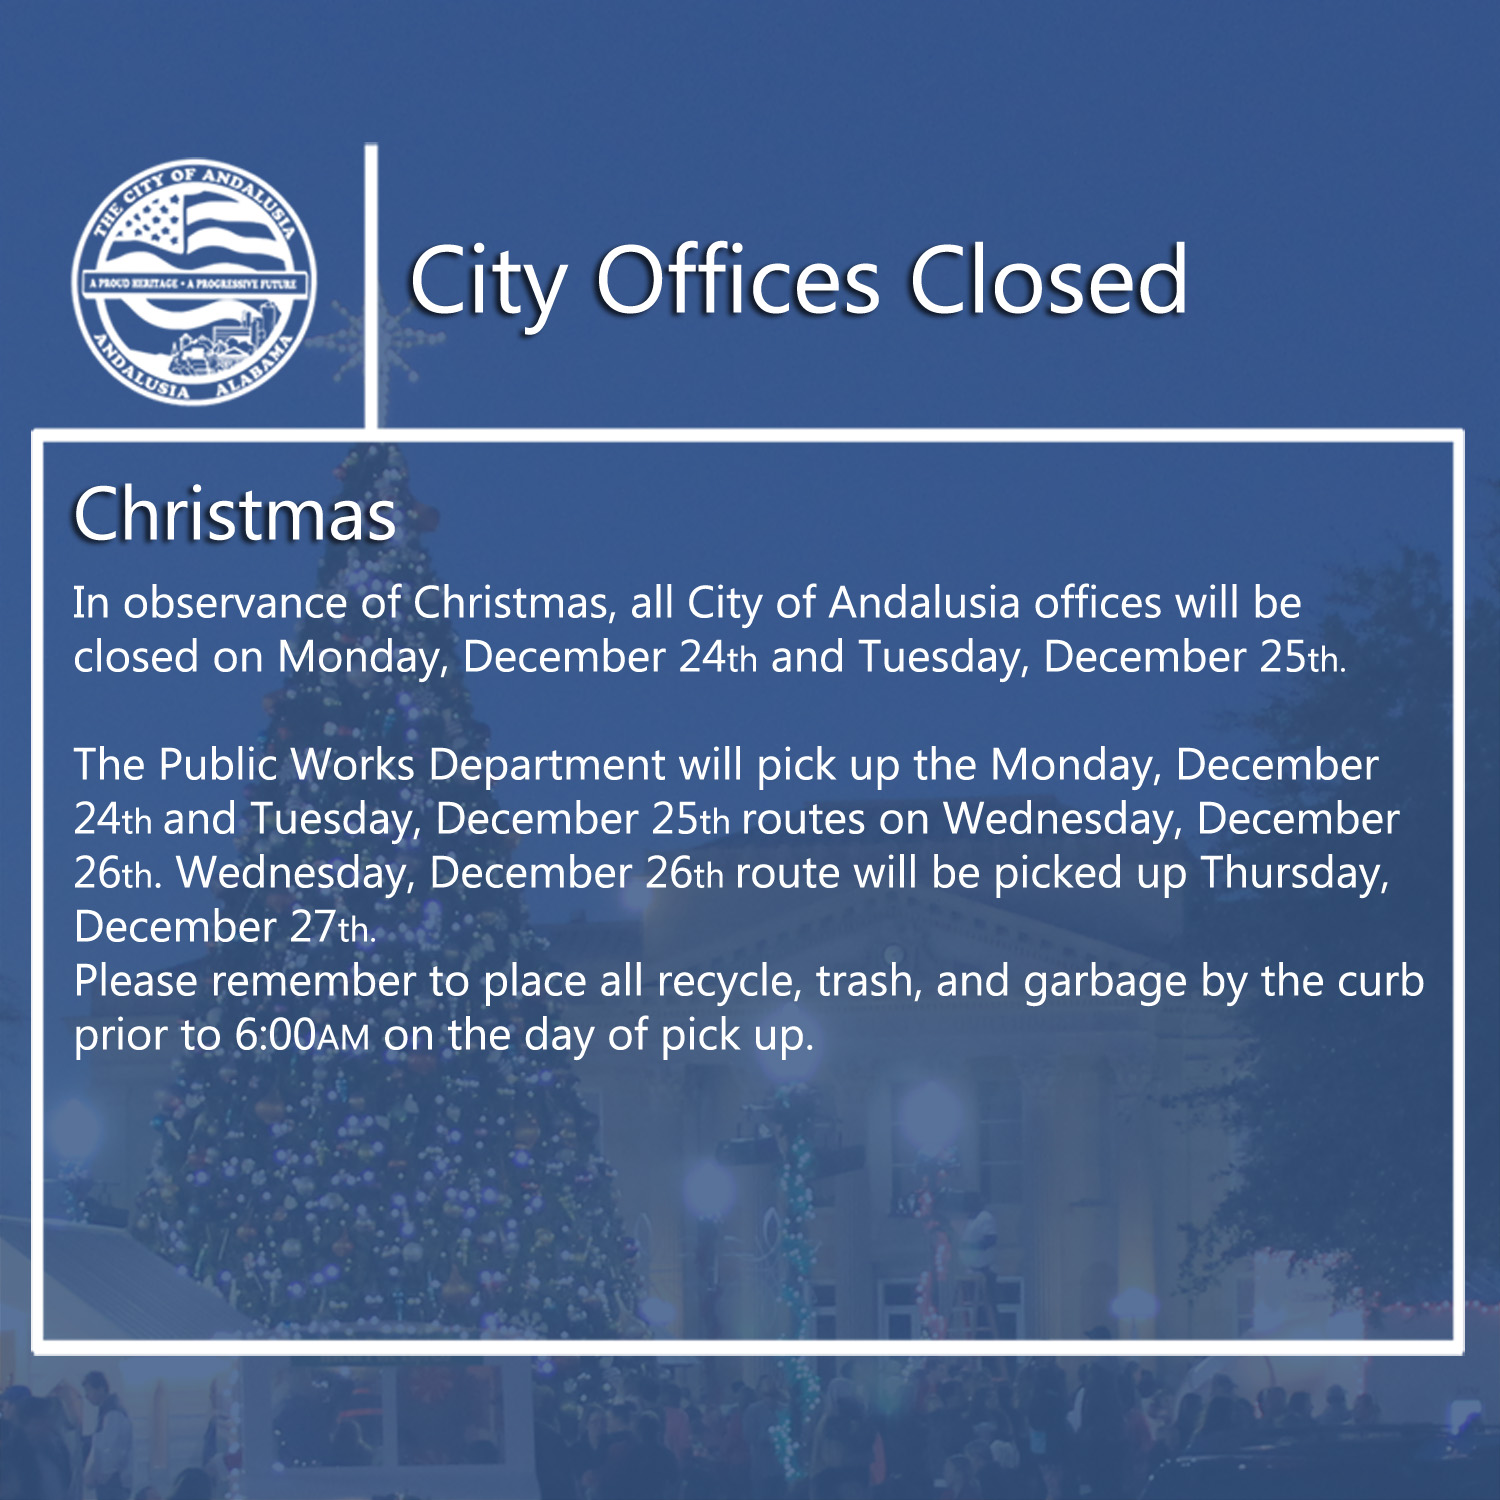 Facebook City Offices Closed Christmas 2018